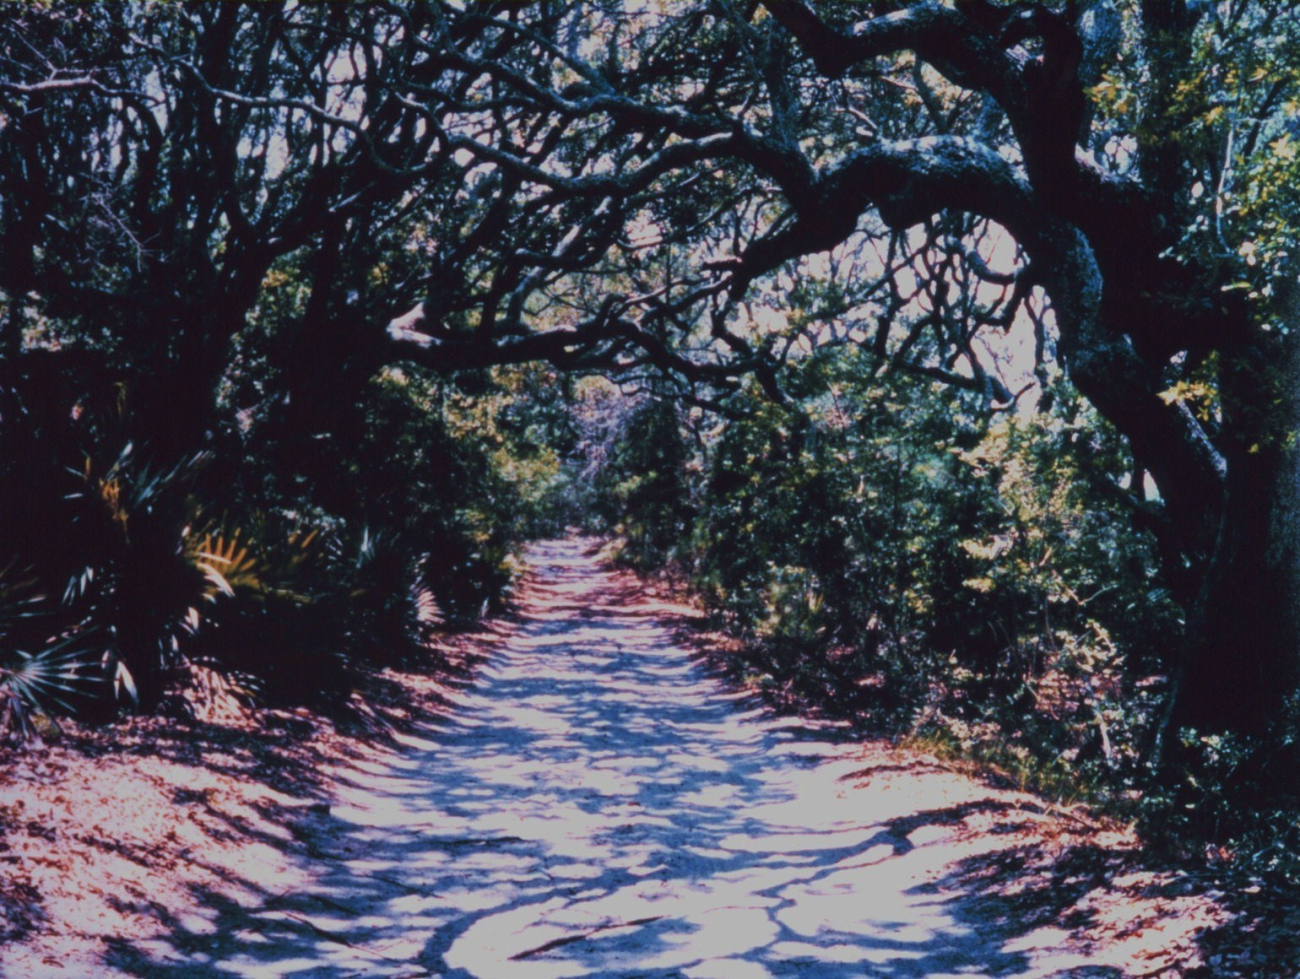 A road through the live oak forest on Cabretta